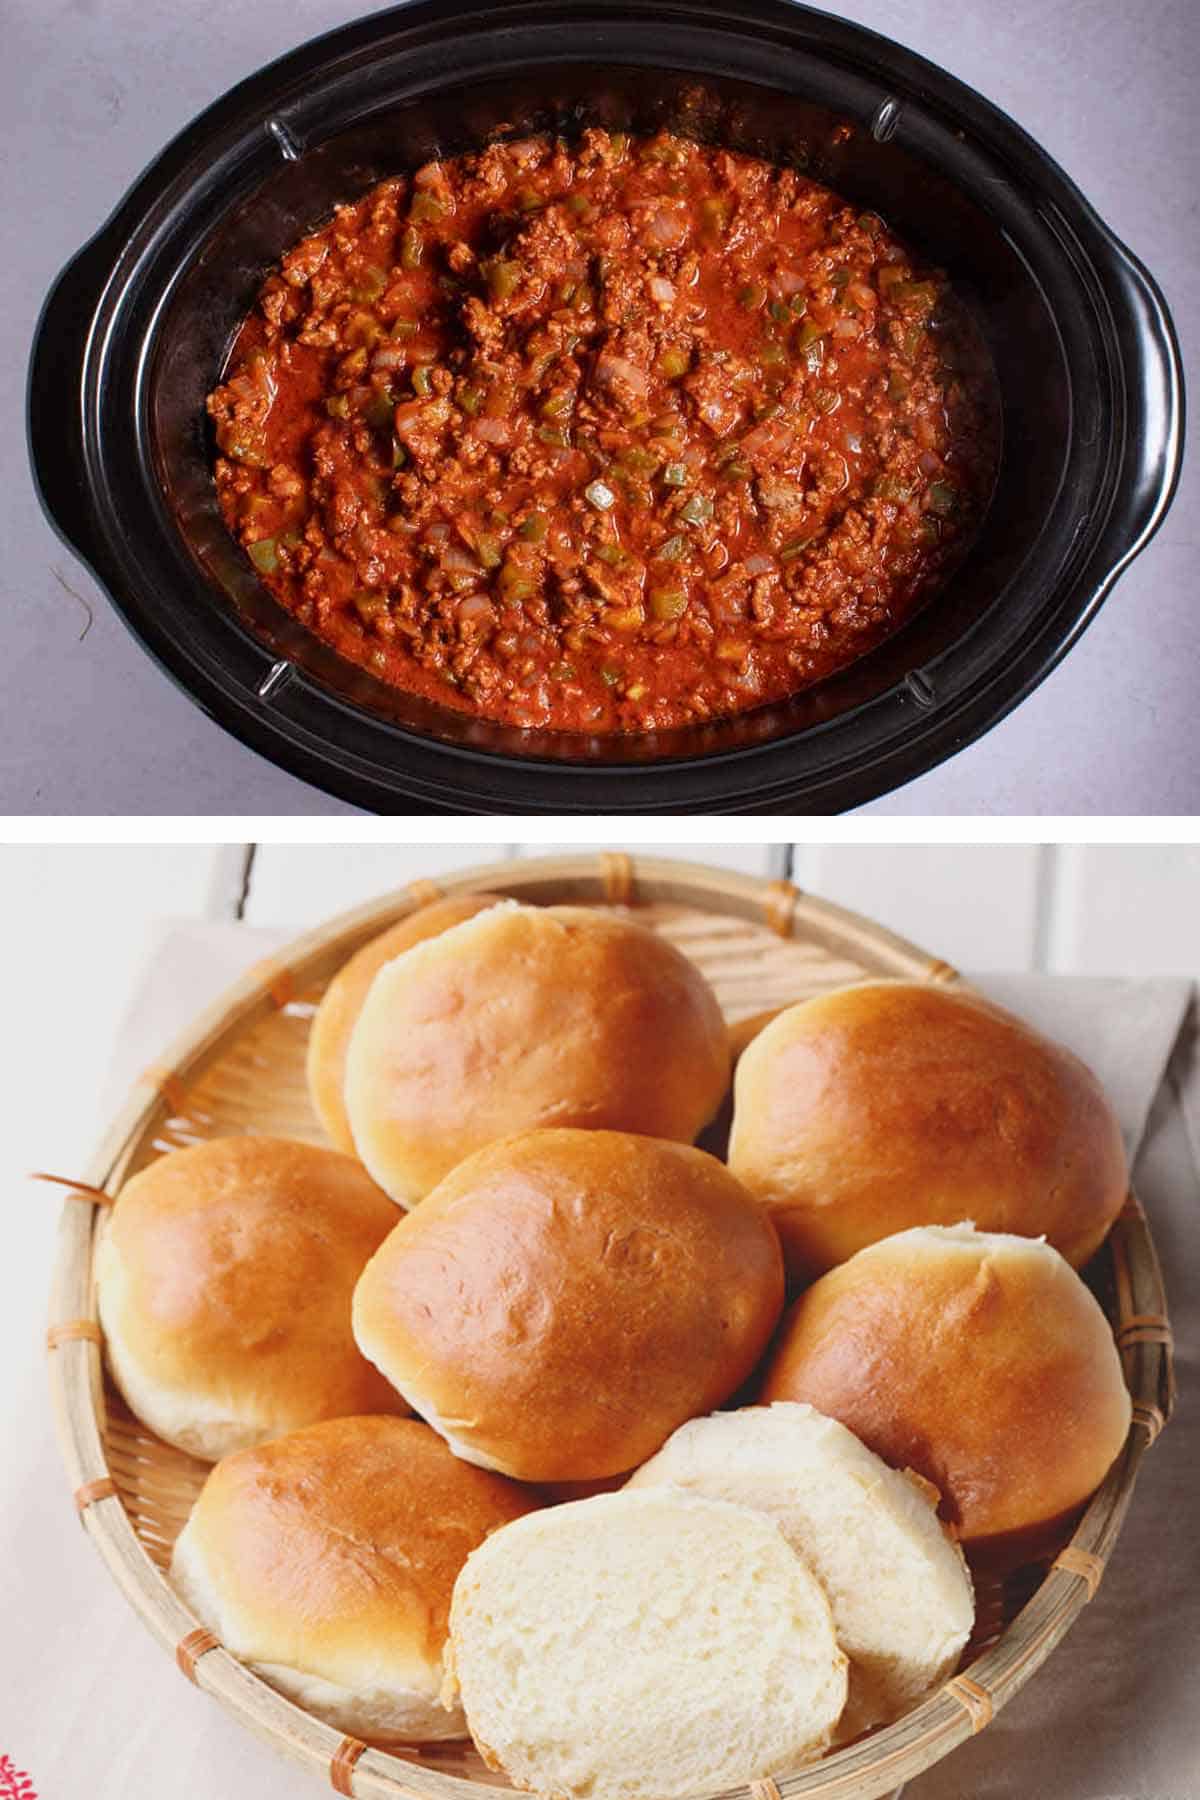 Slow cooker of sloppy joes meat and a basket of hamburger buns.